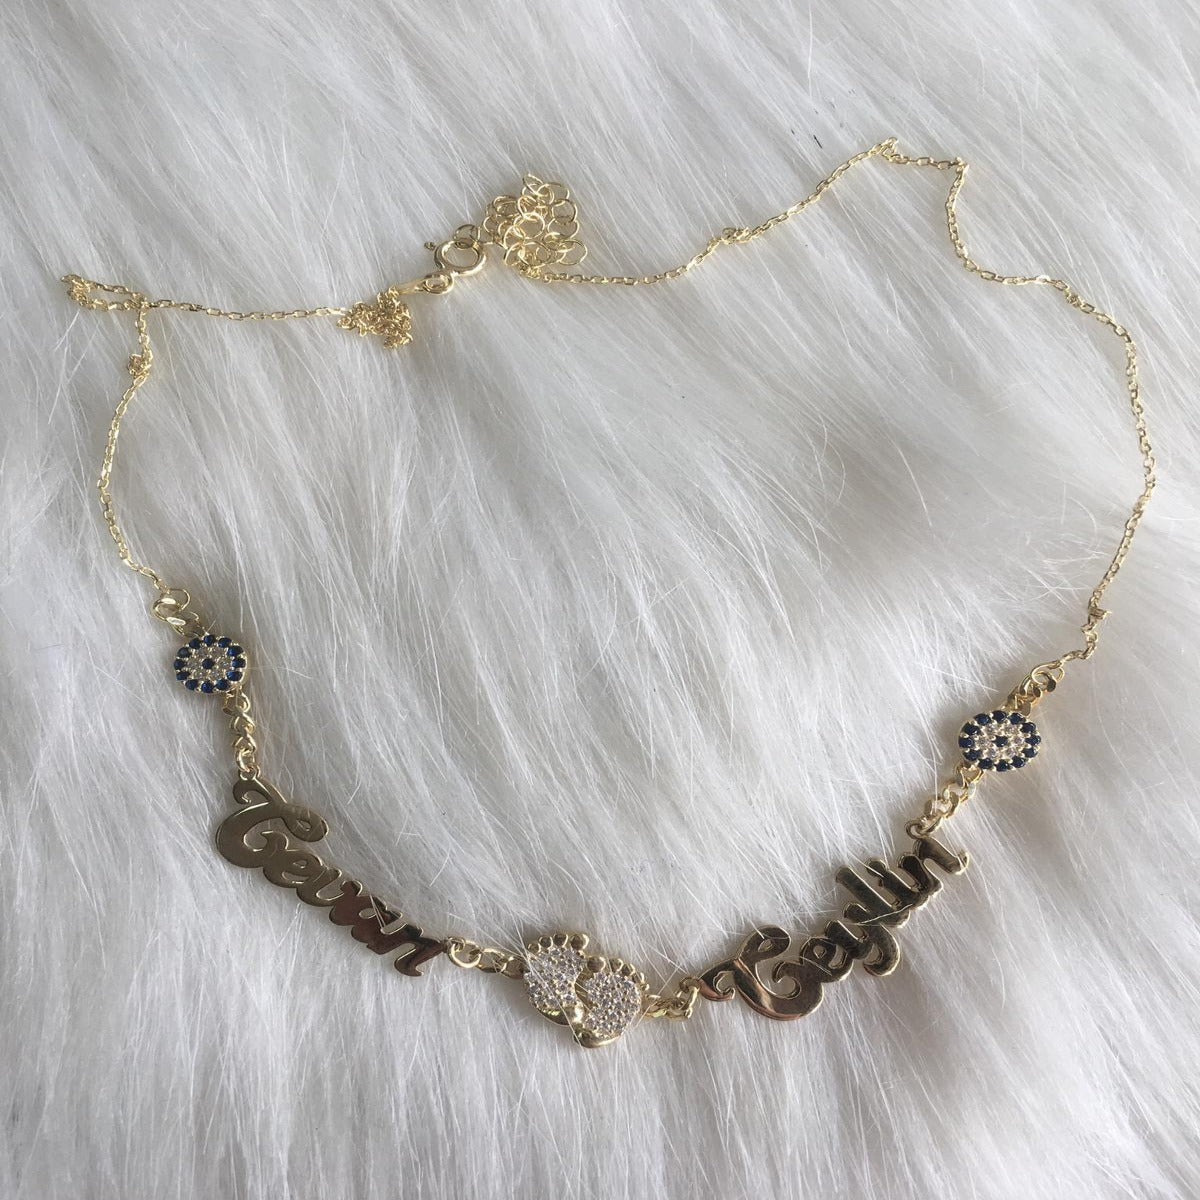 Gold and Silver Plated Personalized Baby Name Necklace - Bling Bling Babies